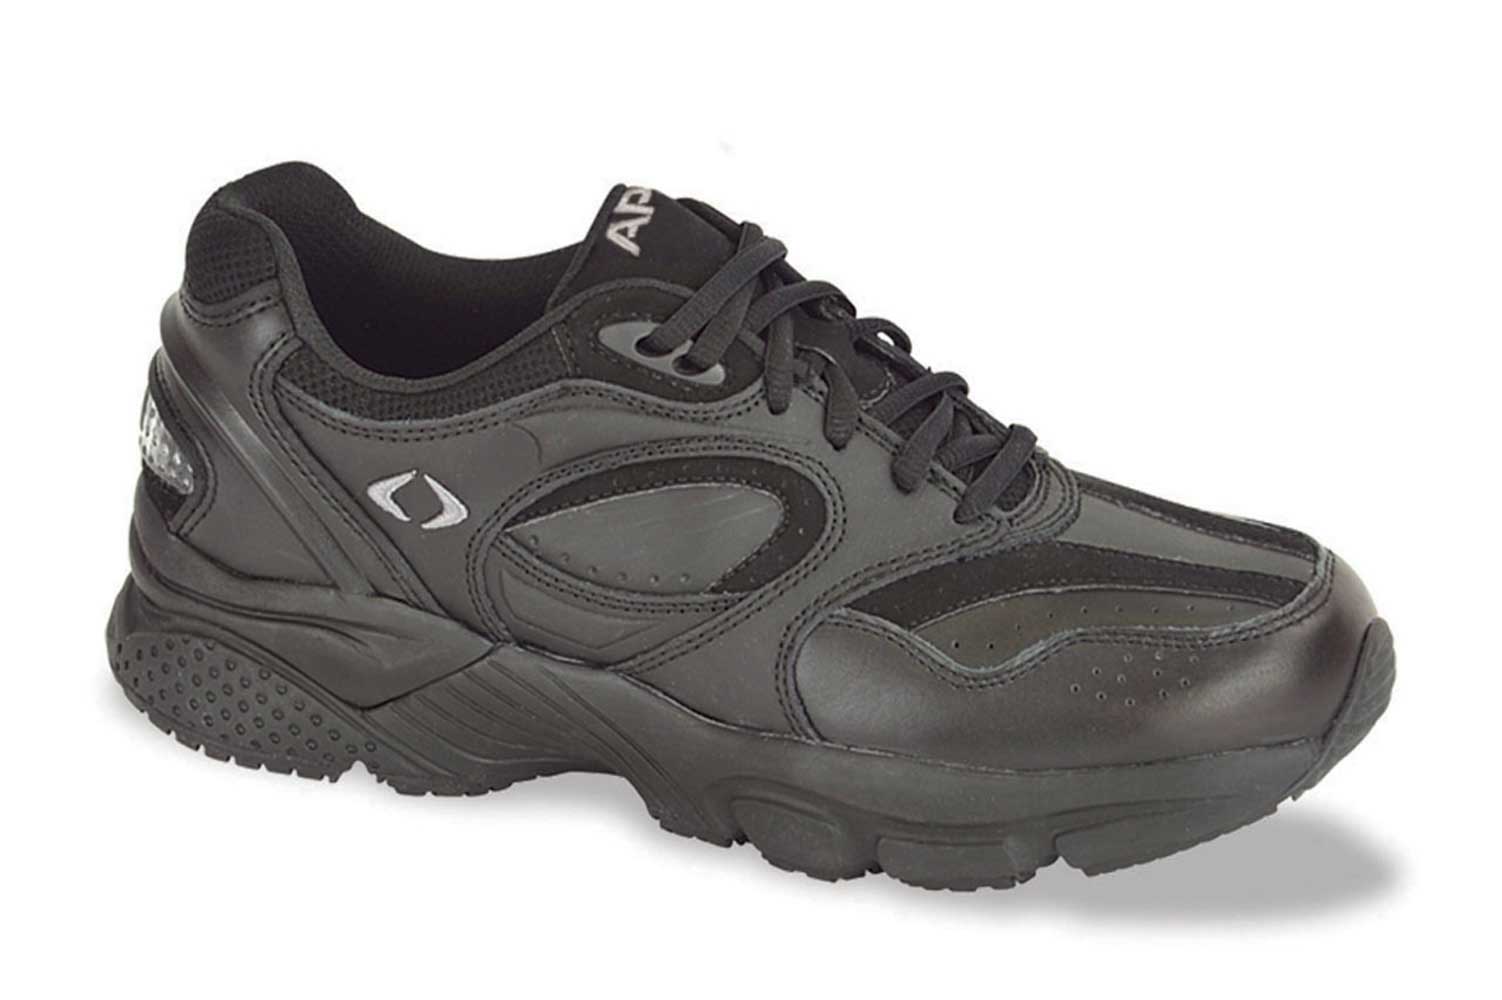 Apex Shoes X801W Walker Athletic Shoe - Women's Comfort Therapeutic Diabetic Shoe - Medium - Extra Wide - Extra Depth For Orthotics